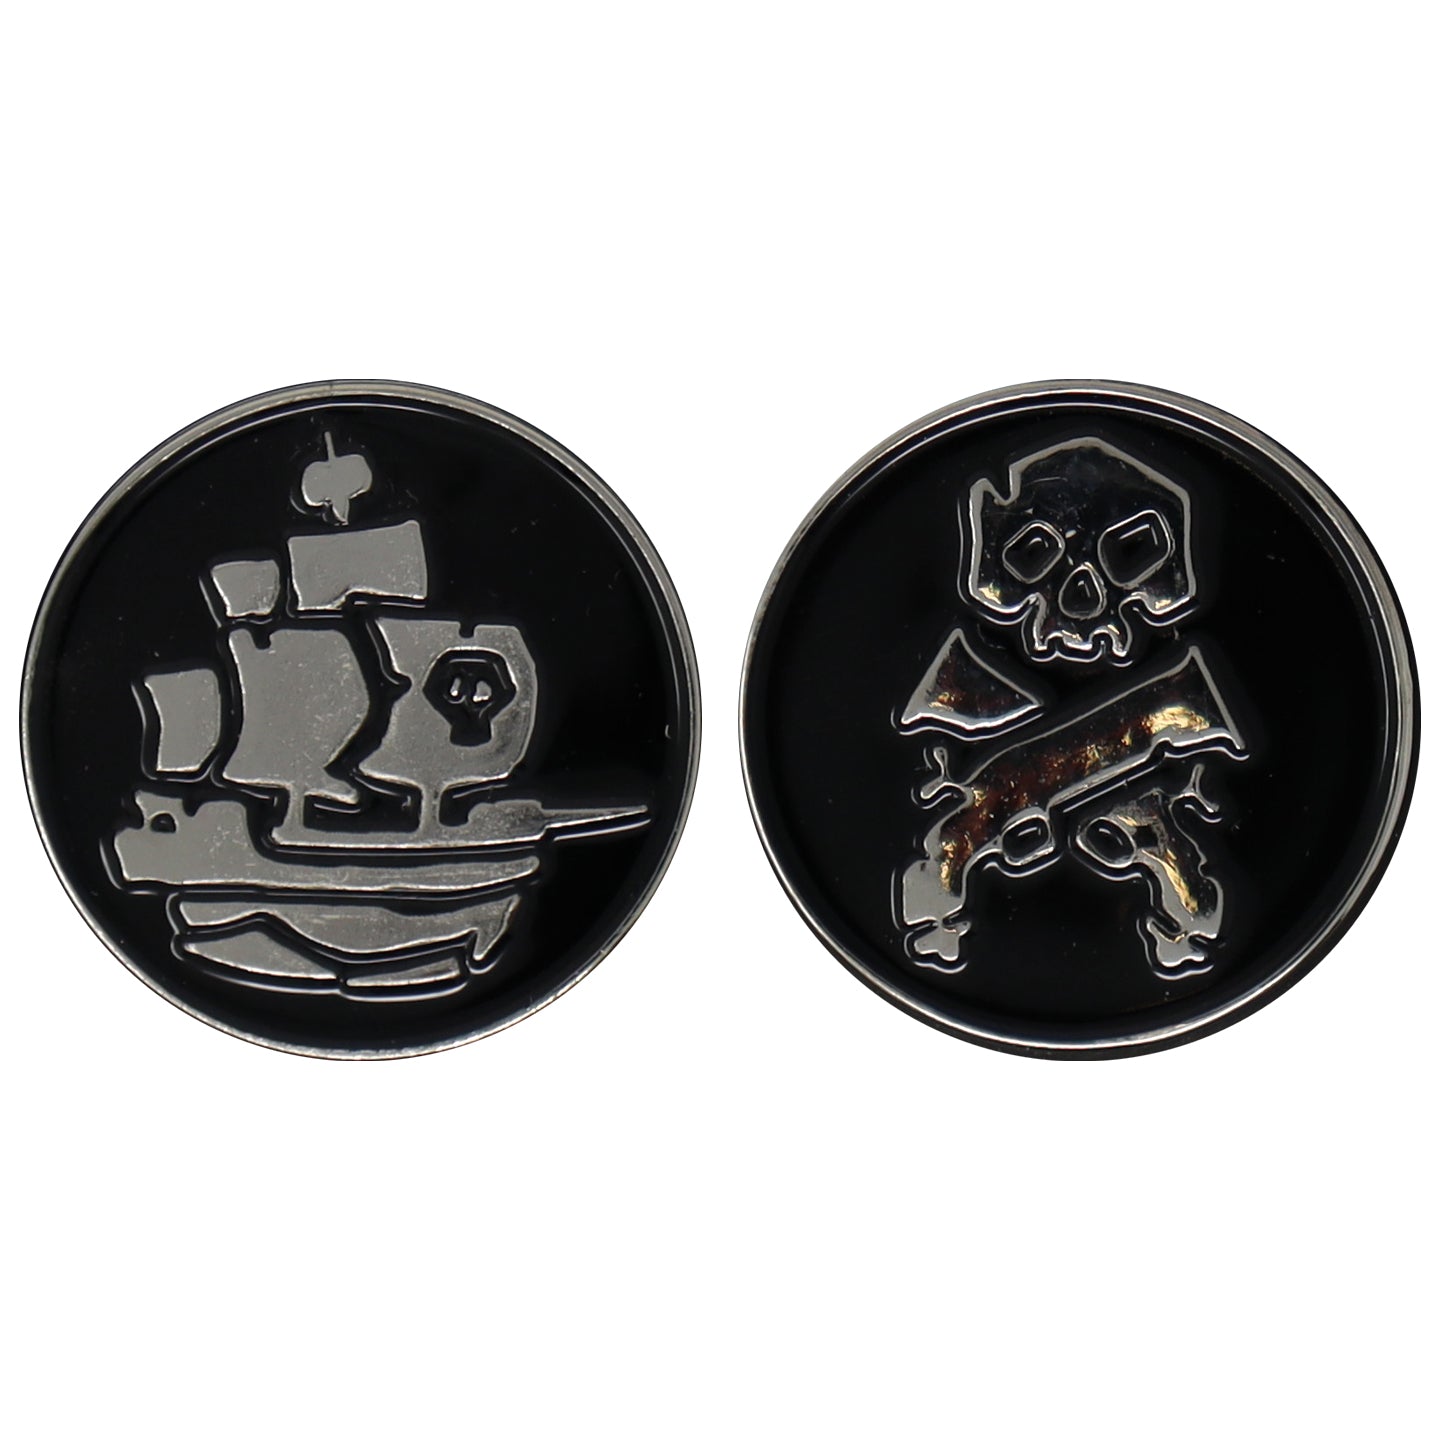 Sea of Thieves Limited Edition Set of 2 Pin Badges